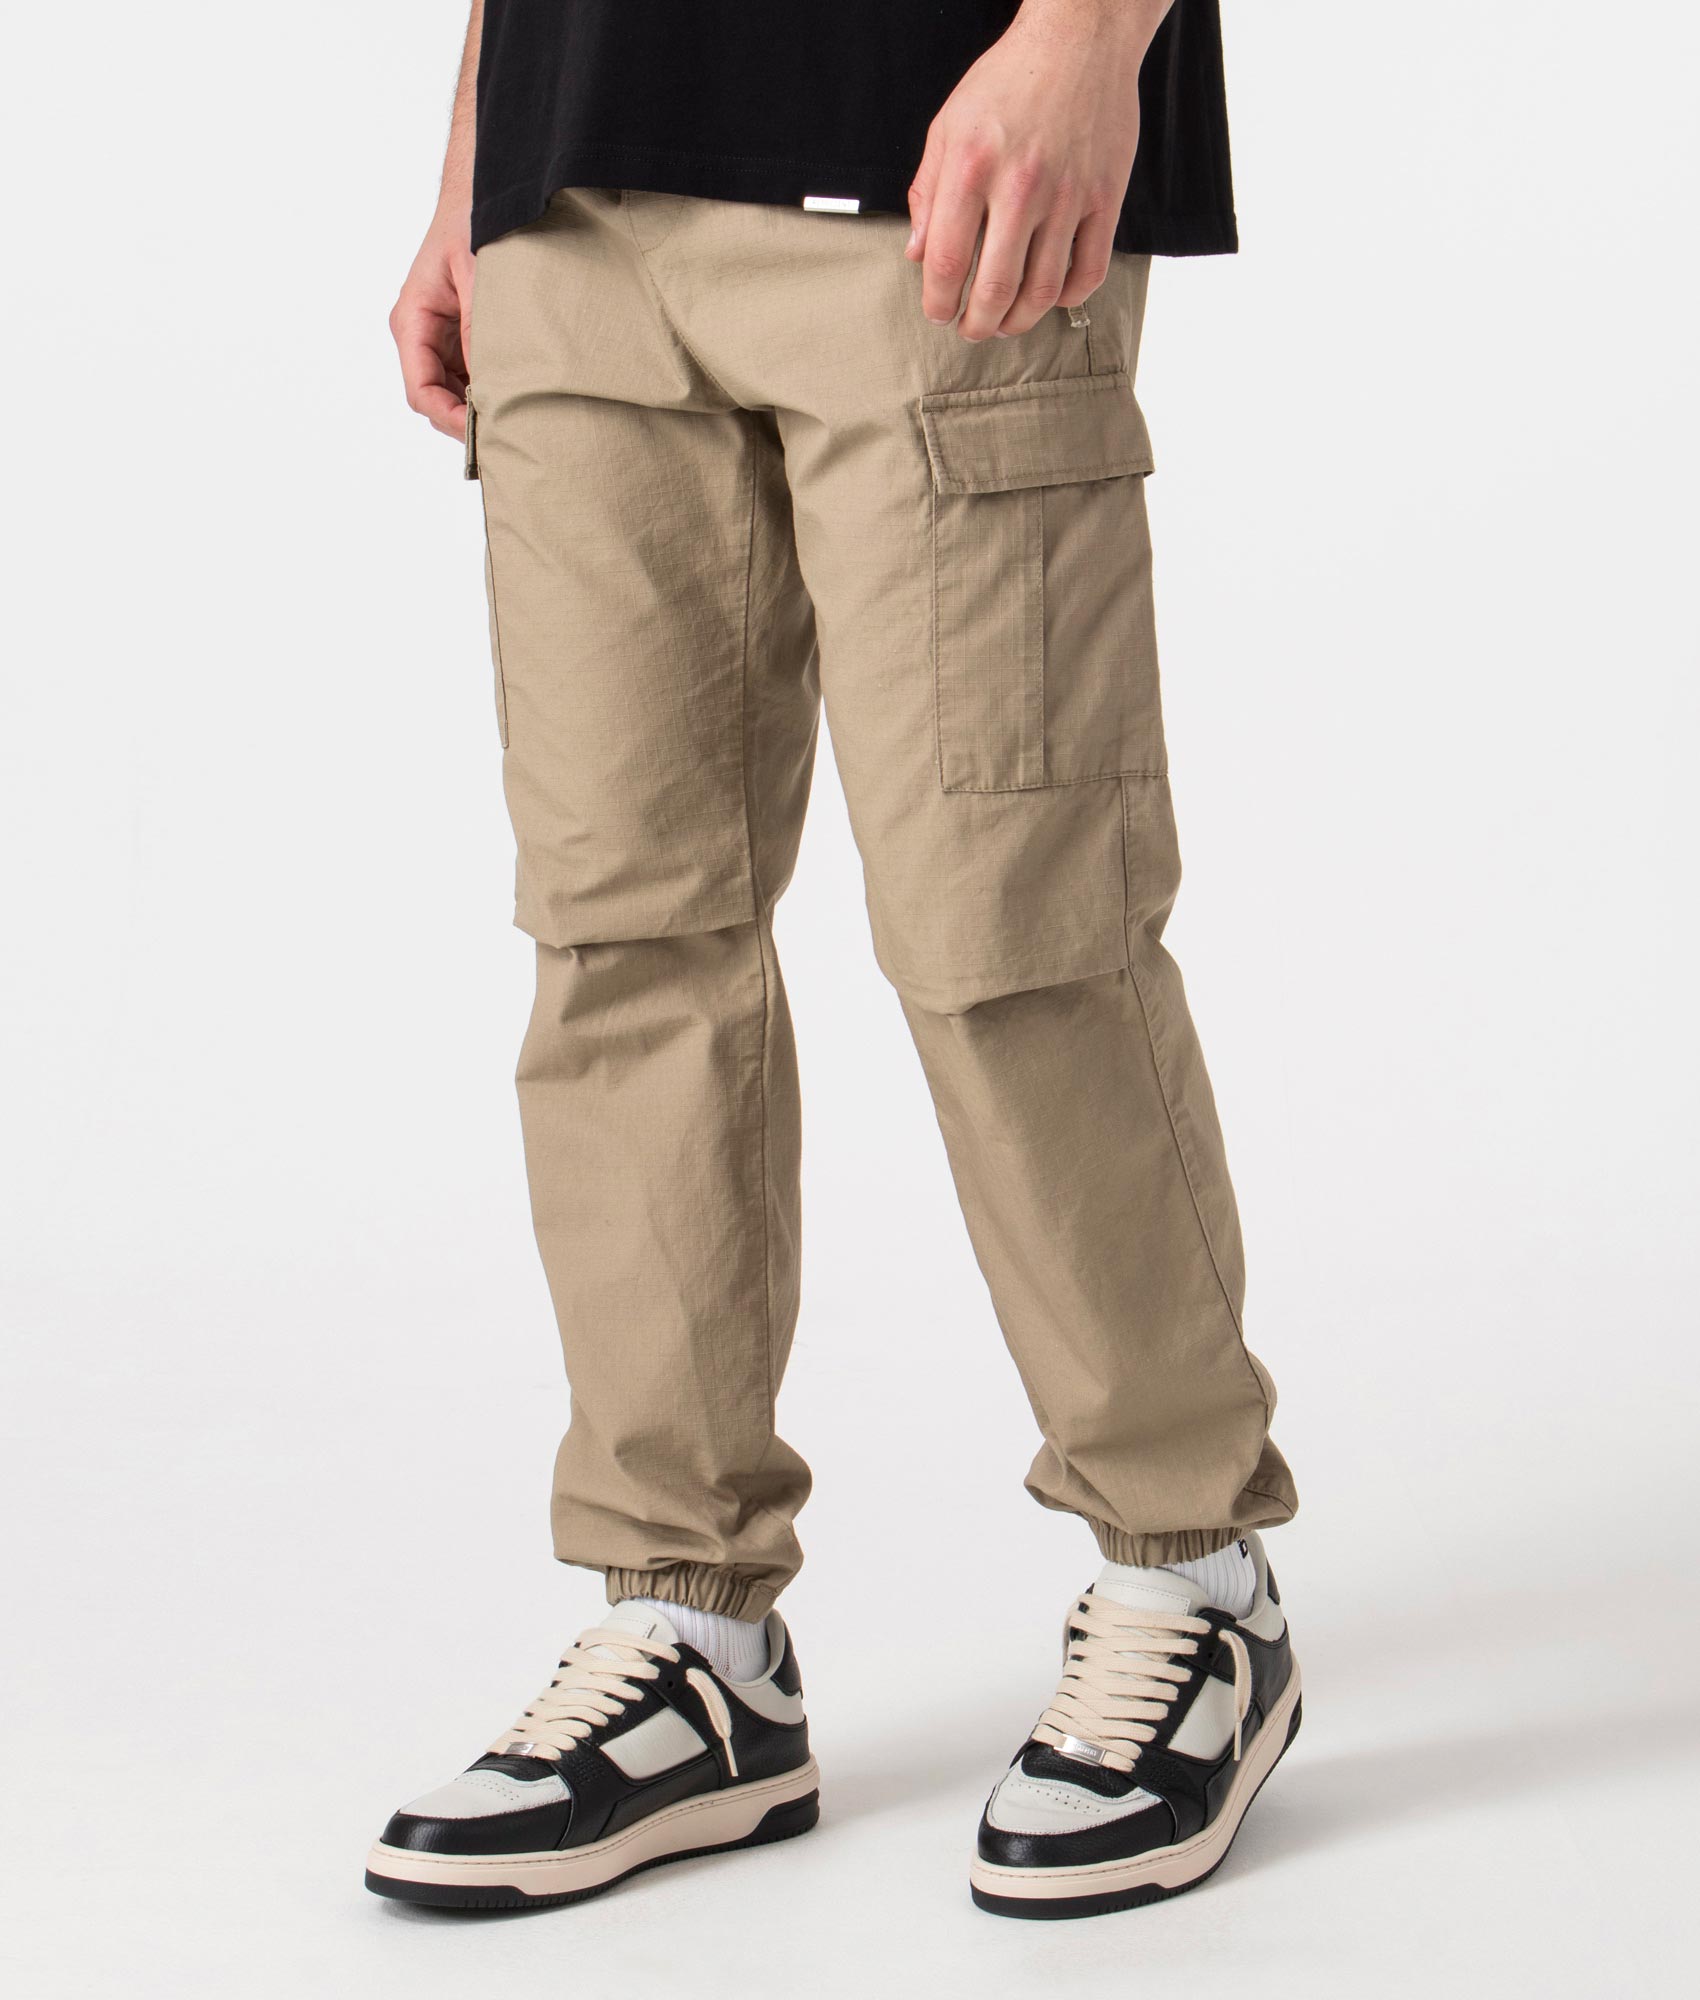 Carhartt WIP Mens Relaxed Fit Cargo Joggers - Colour: 8Y02 Leather Rinsed - Size: M/34W